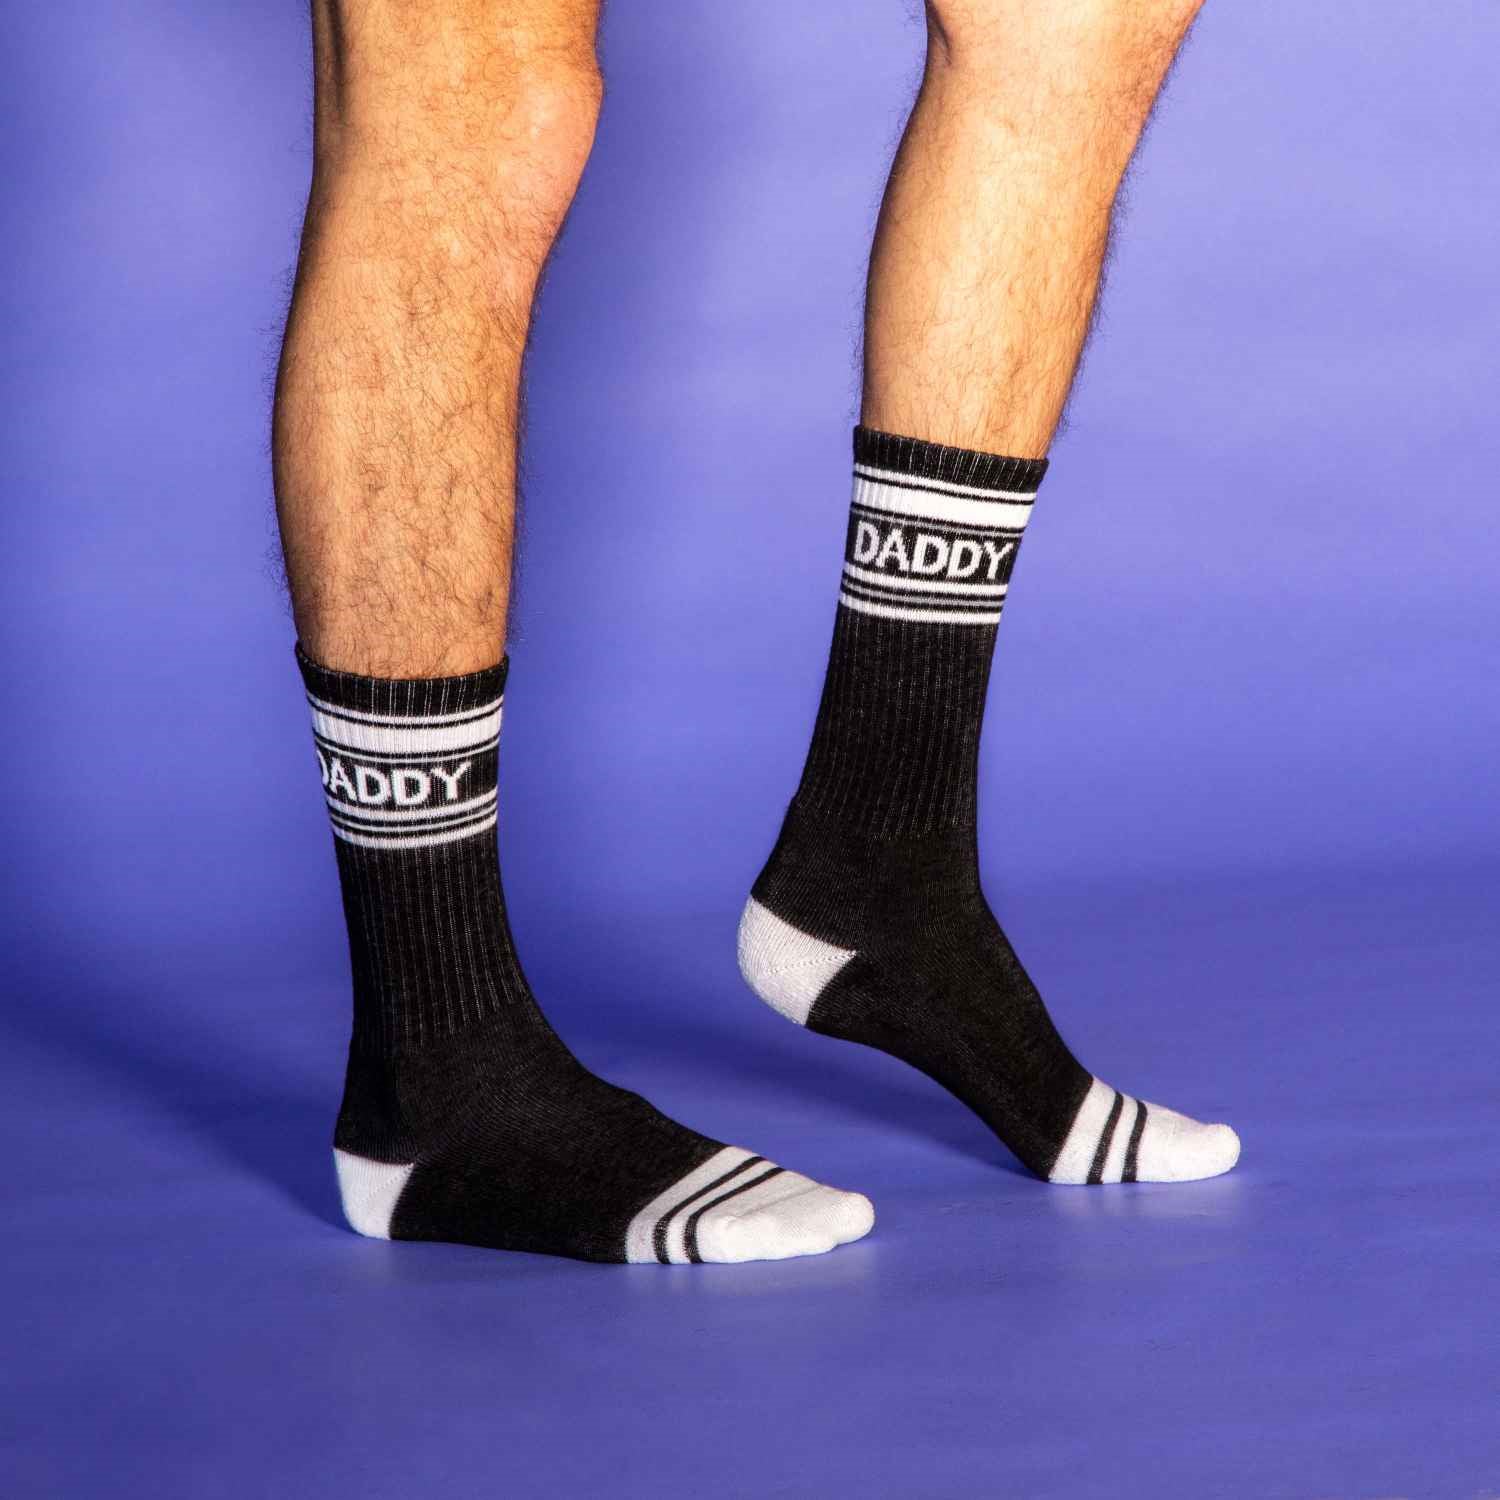 A pair of black and white crew socks that read "daddy."